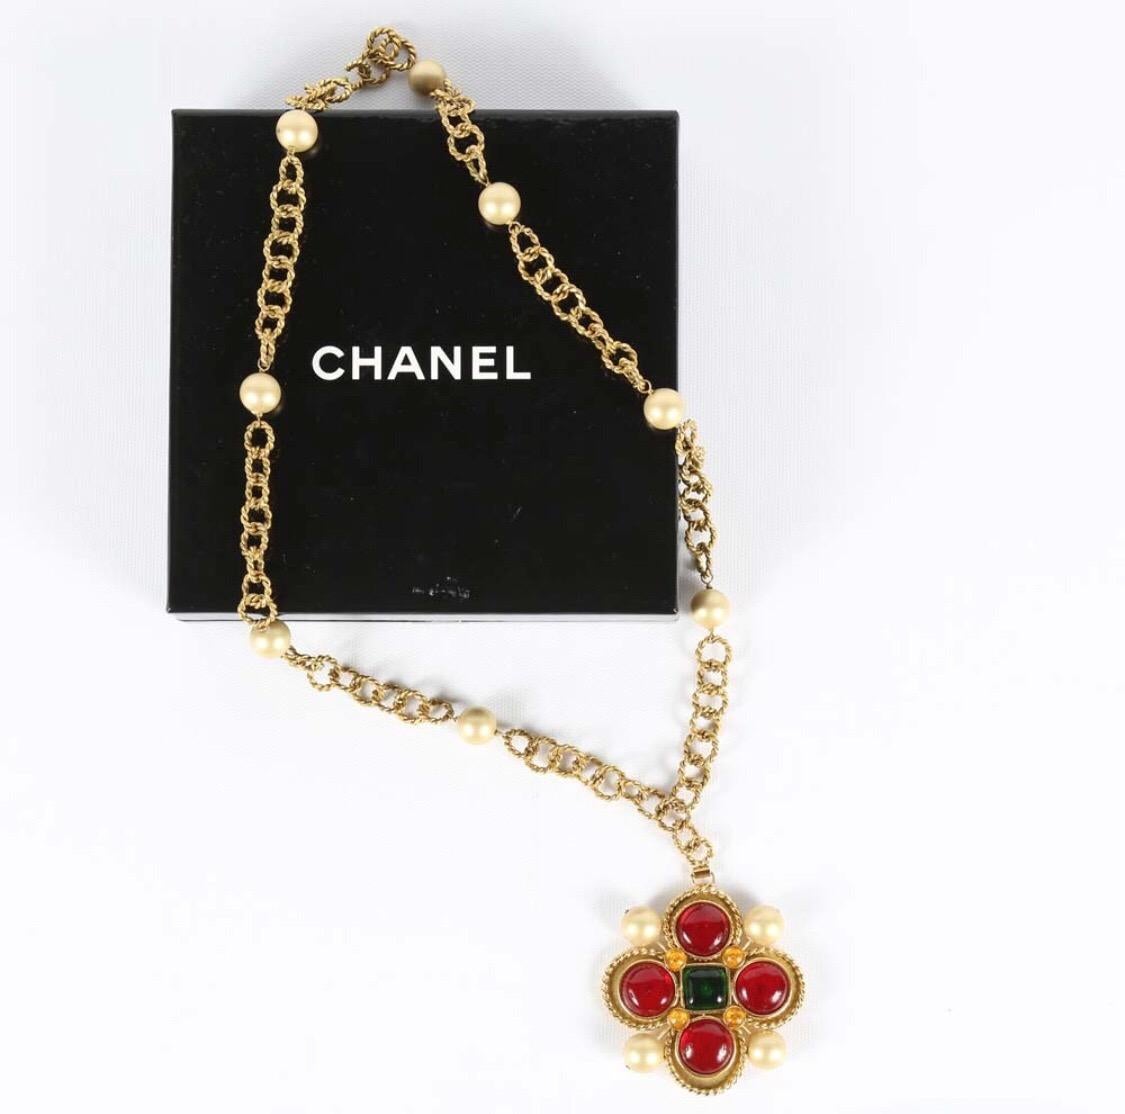 A beautiful Chanel Gripoix pendant necklace. This Chanel necklace features a circle linked chain with faux pearls. The pendant is of green gripoix glass center stone is surrounded by multiple red gripoix glass stones and pearls. Marked on the back